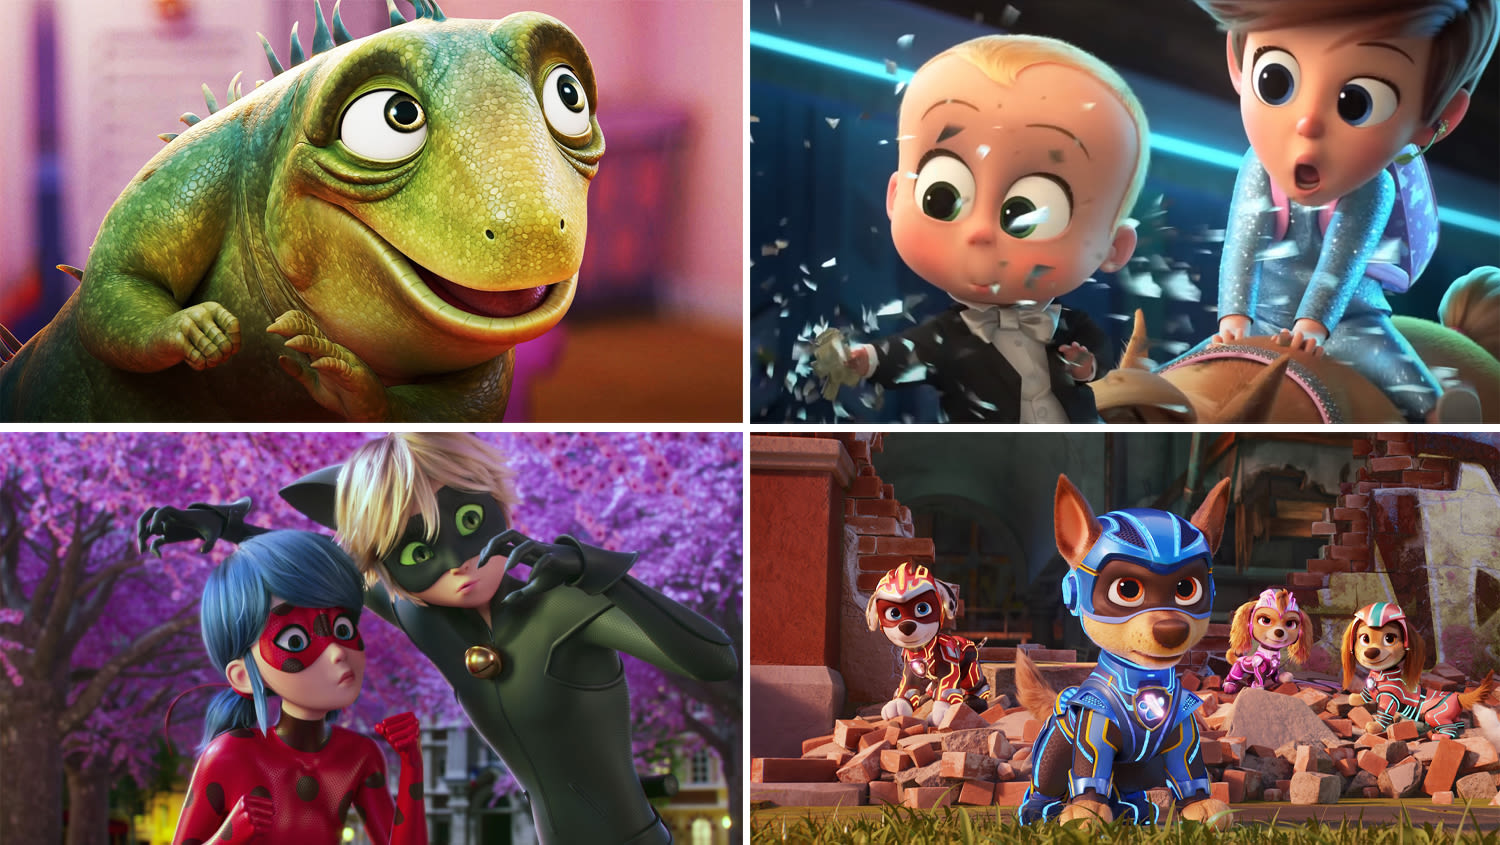 Animated Films Are 33 Of The Most Watched In Netflix’s New Data Dump: How Streamer’s Originals Stacked Up...